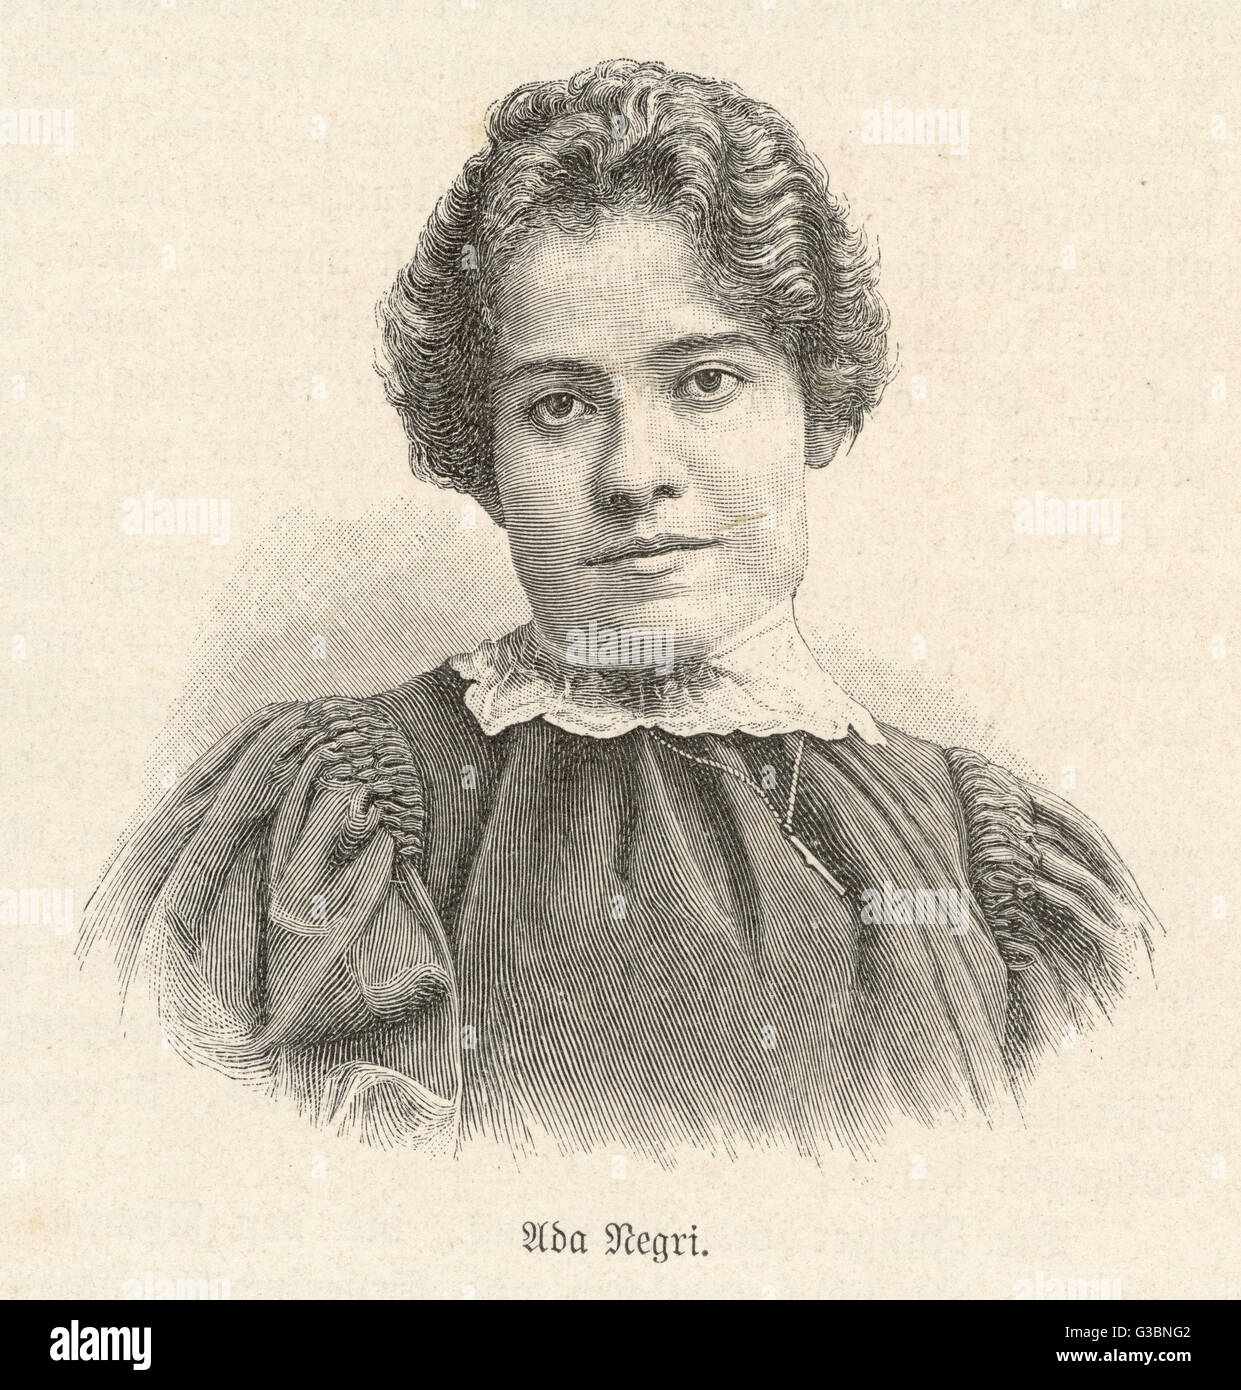 ADA NEGRI Italian teacher and writer,  publishing poems and  political, mystical and  feminist works.      Date: 1870 - 1945 Stock Photo